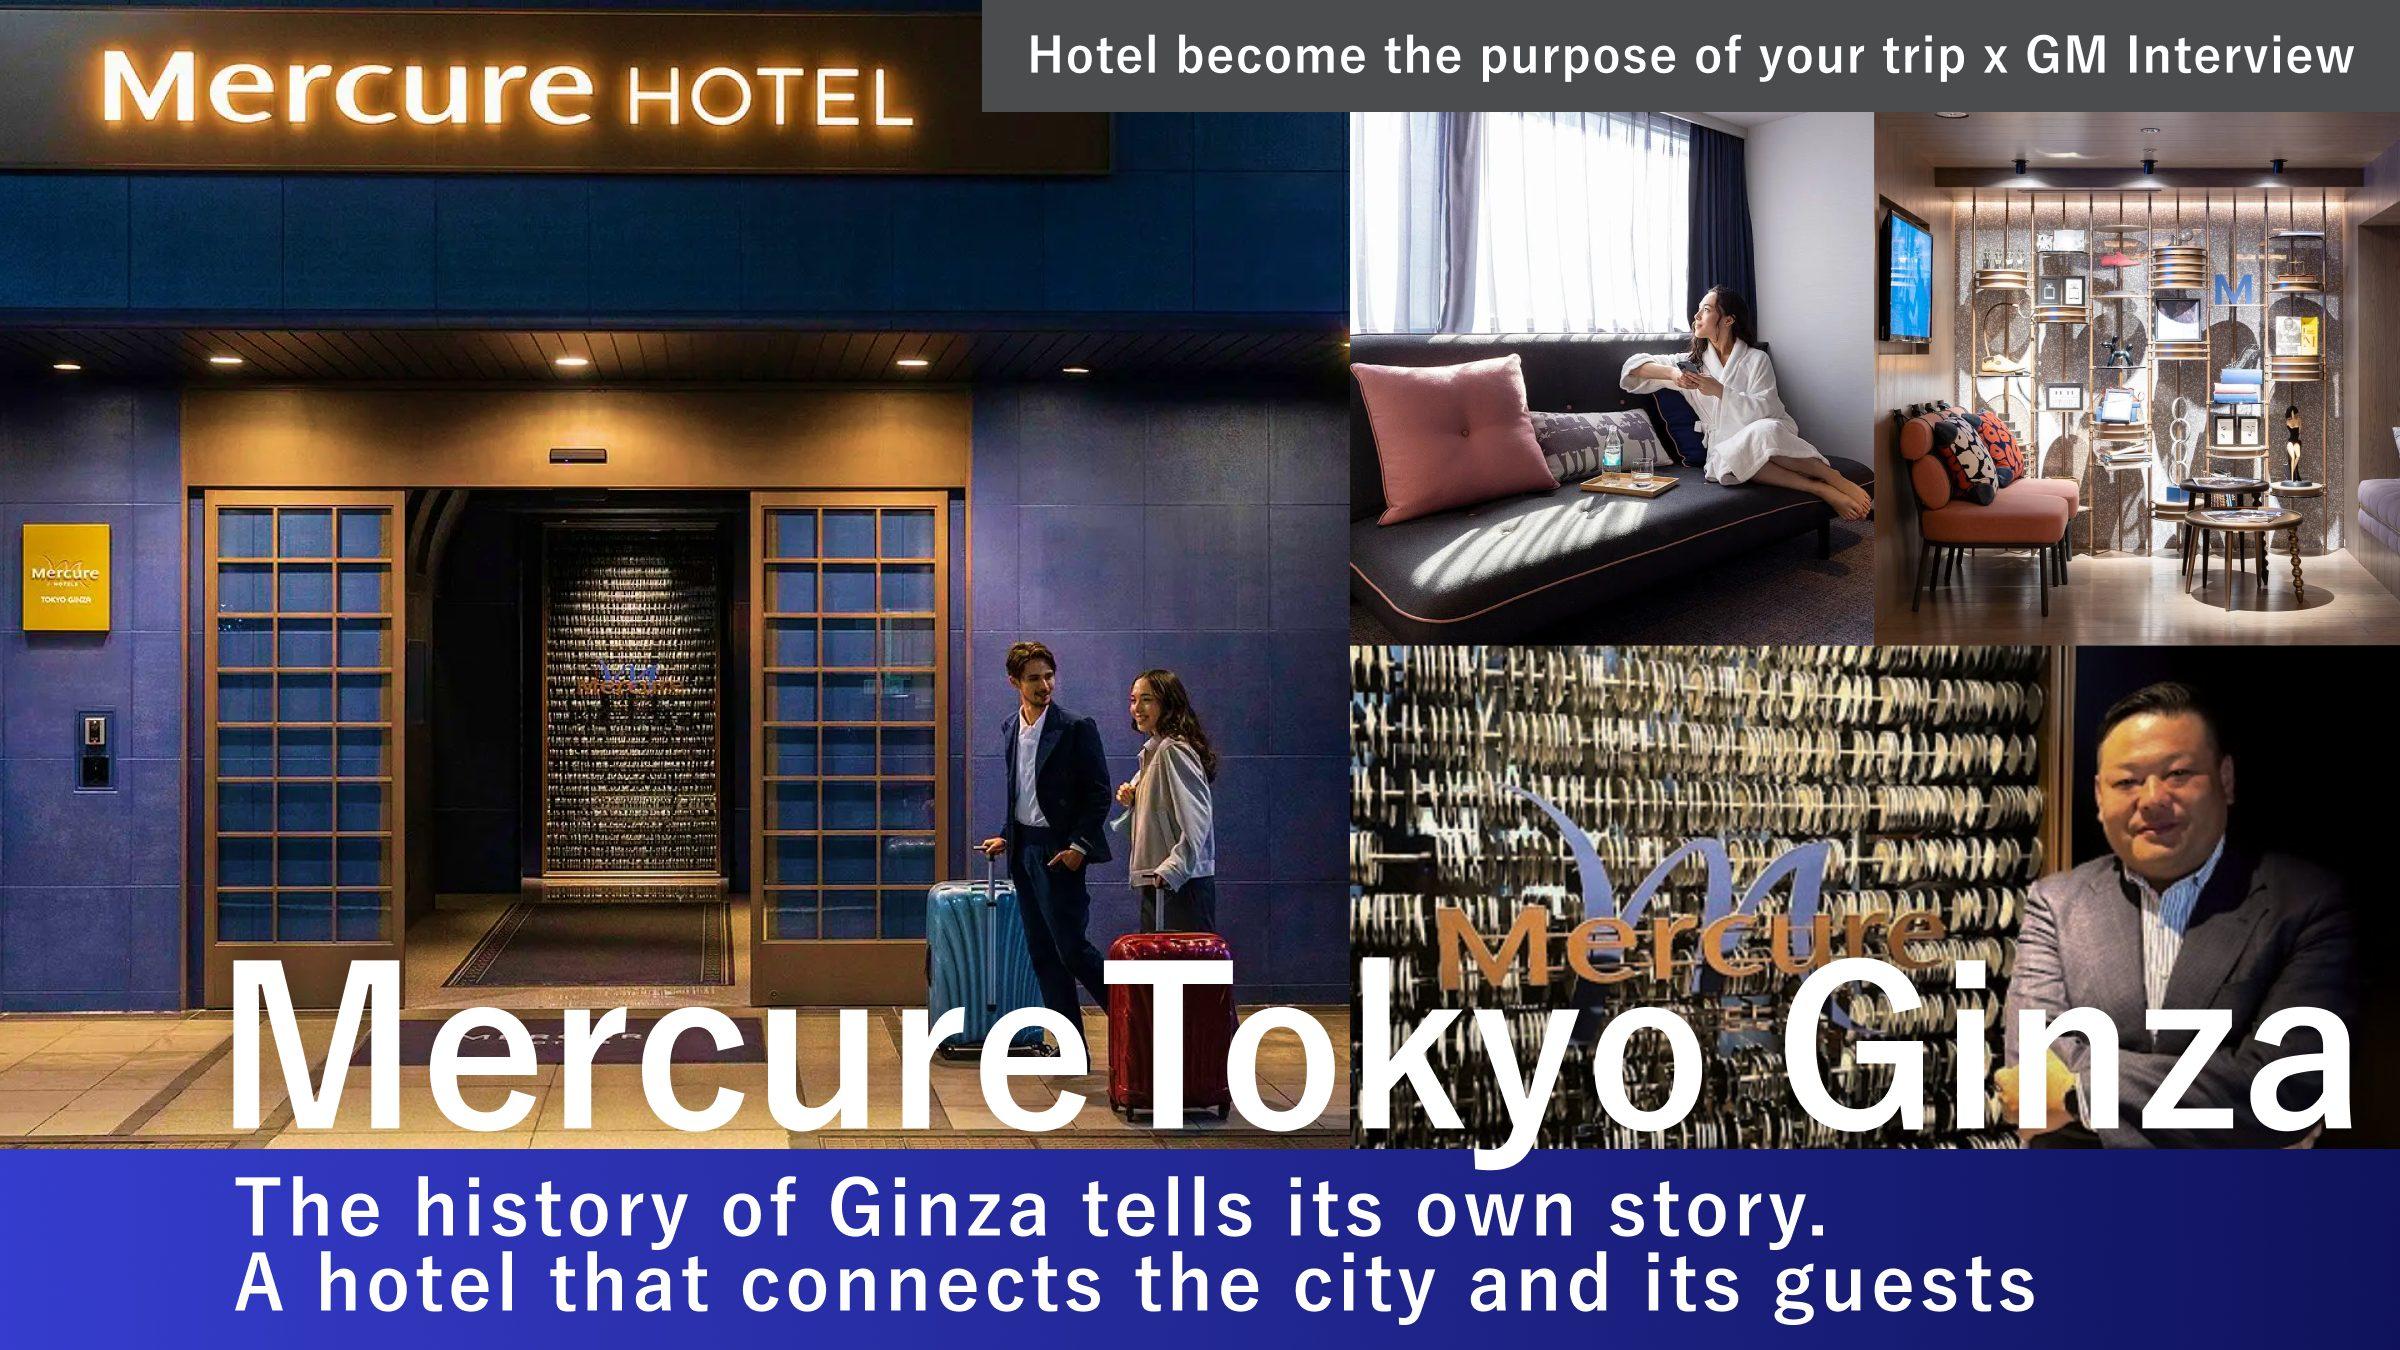 【Hotel become the purpose of your trip x GM Interview】“ The history of Ginza tells its own story. A hotel that connects the city and its guests” &#8211; Mercure Tokyo Ginza